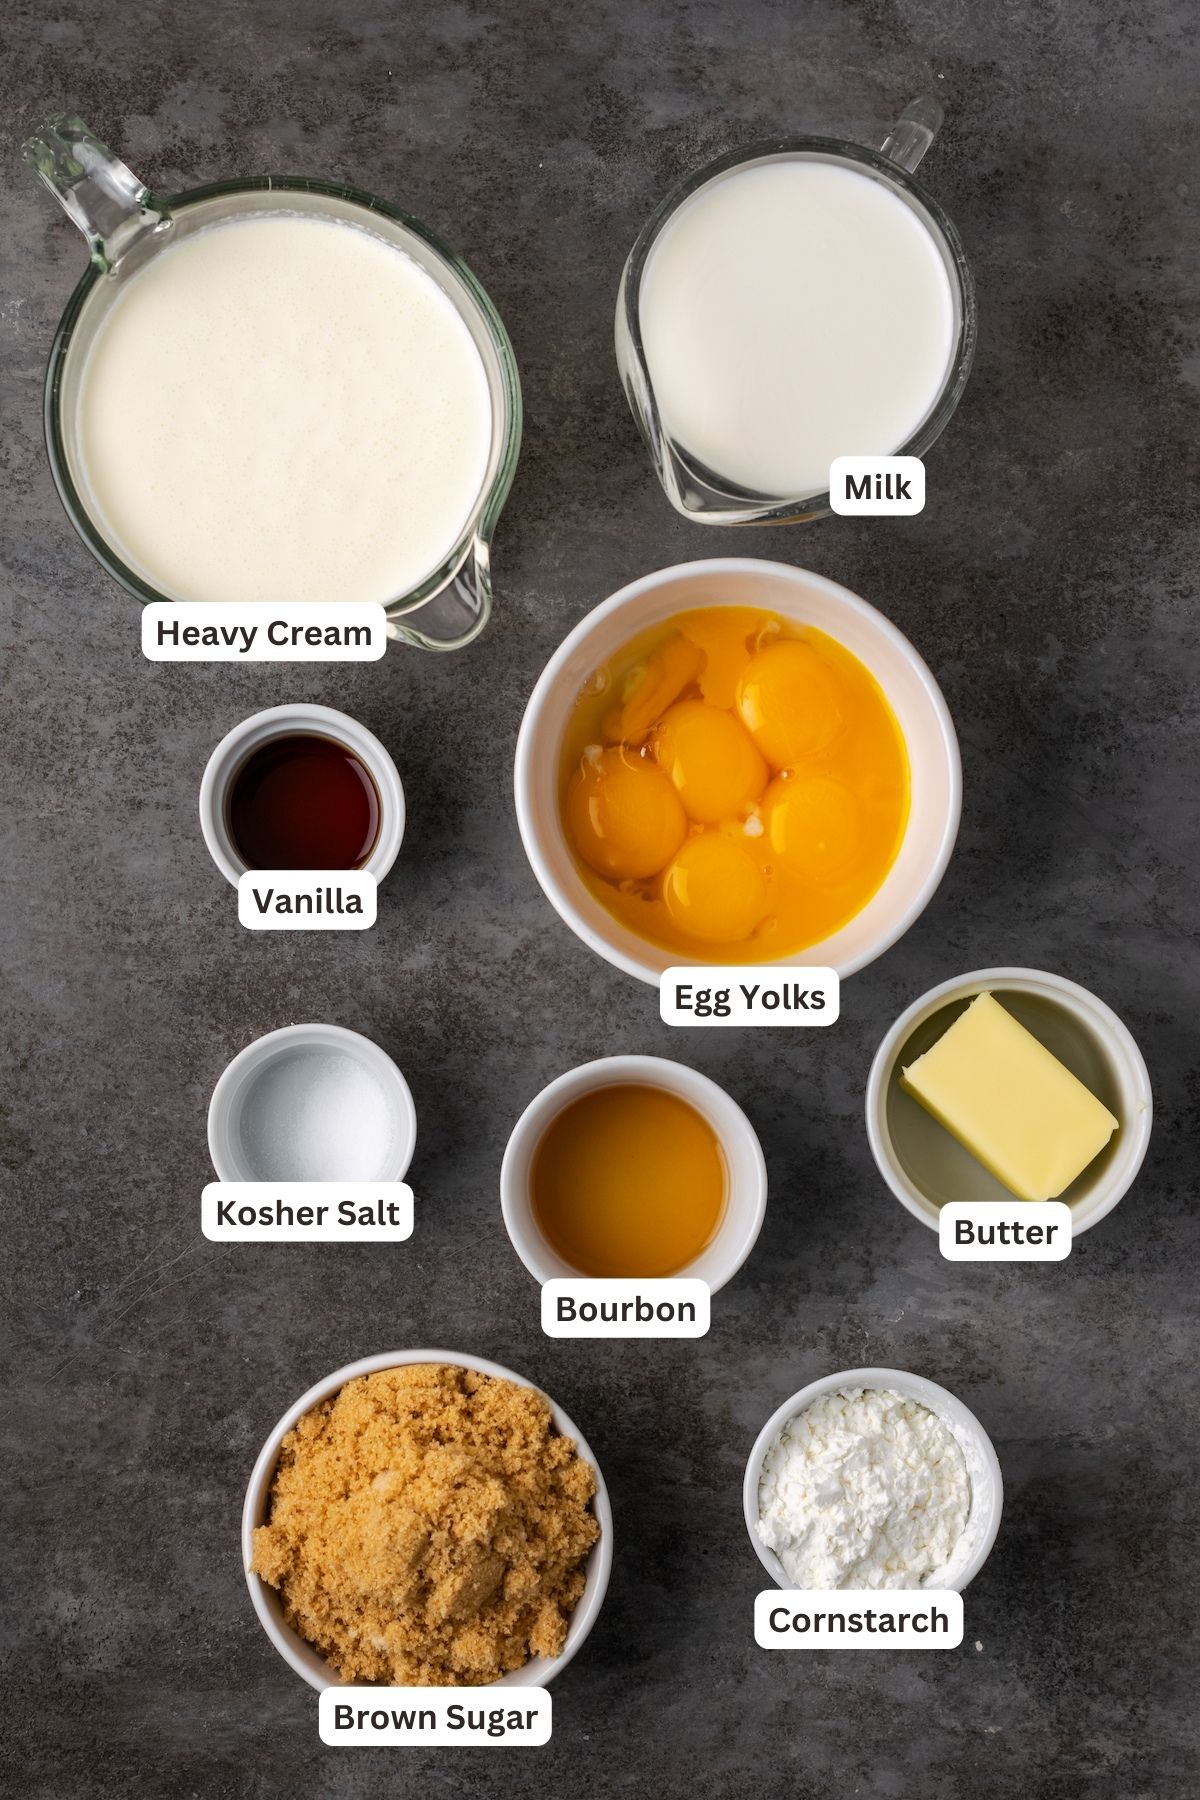 Ingredients for butterscotch pudding with a text label overlaying each ingredient.